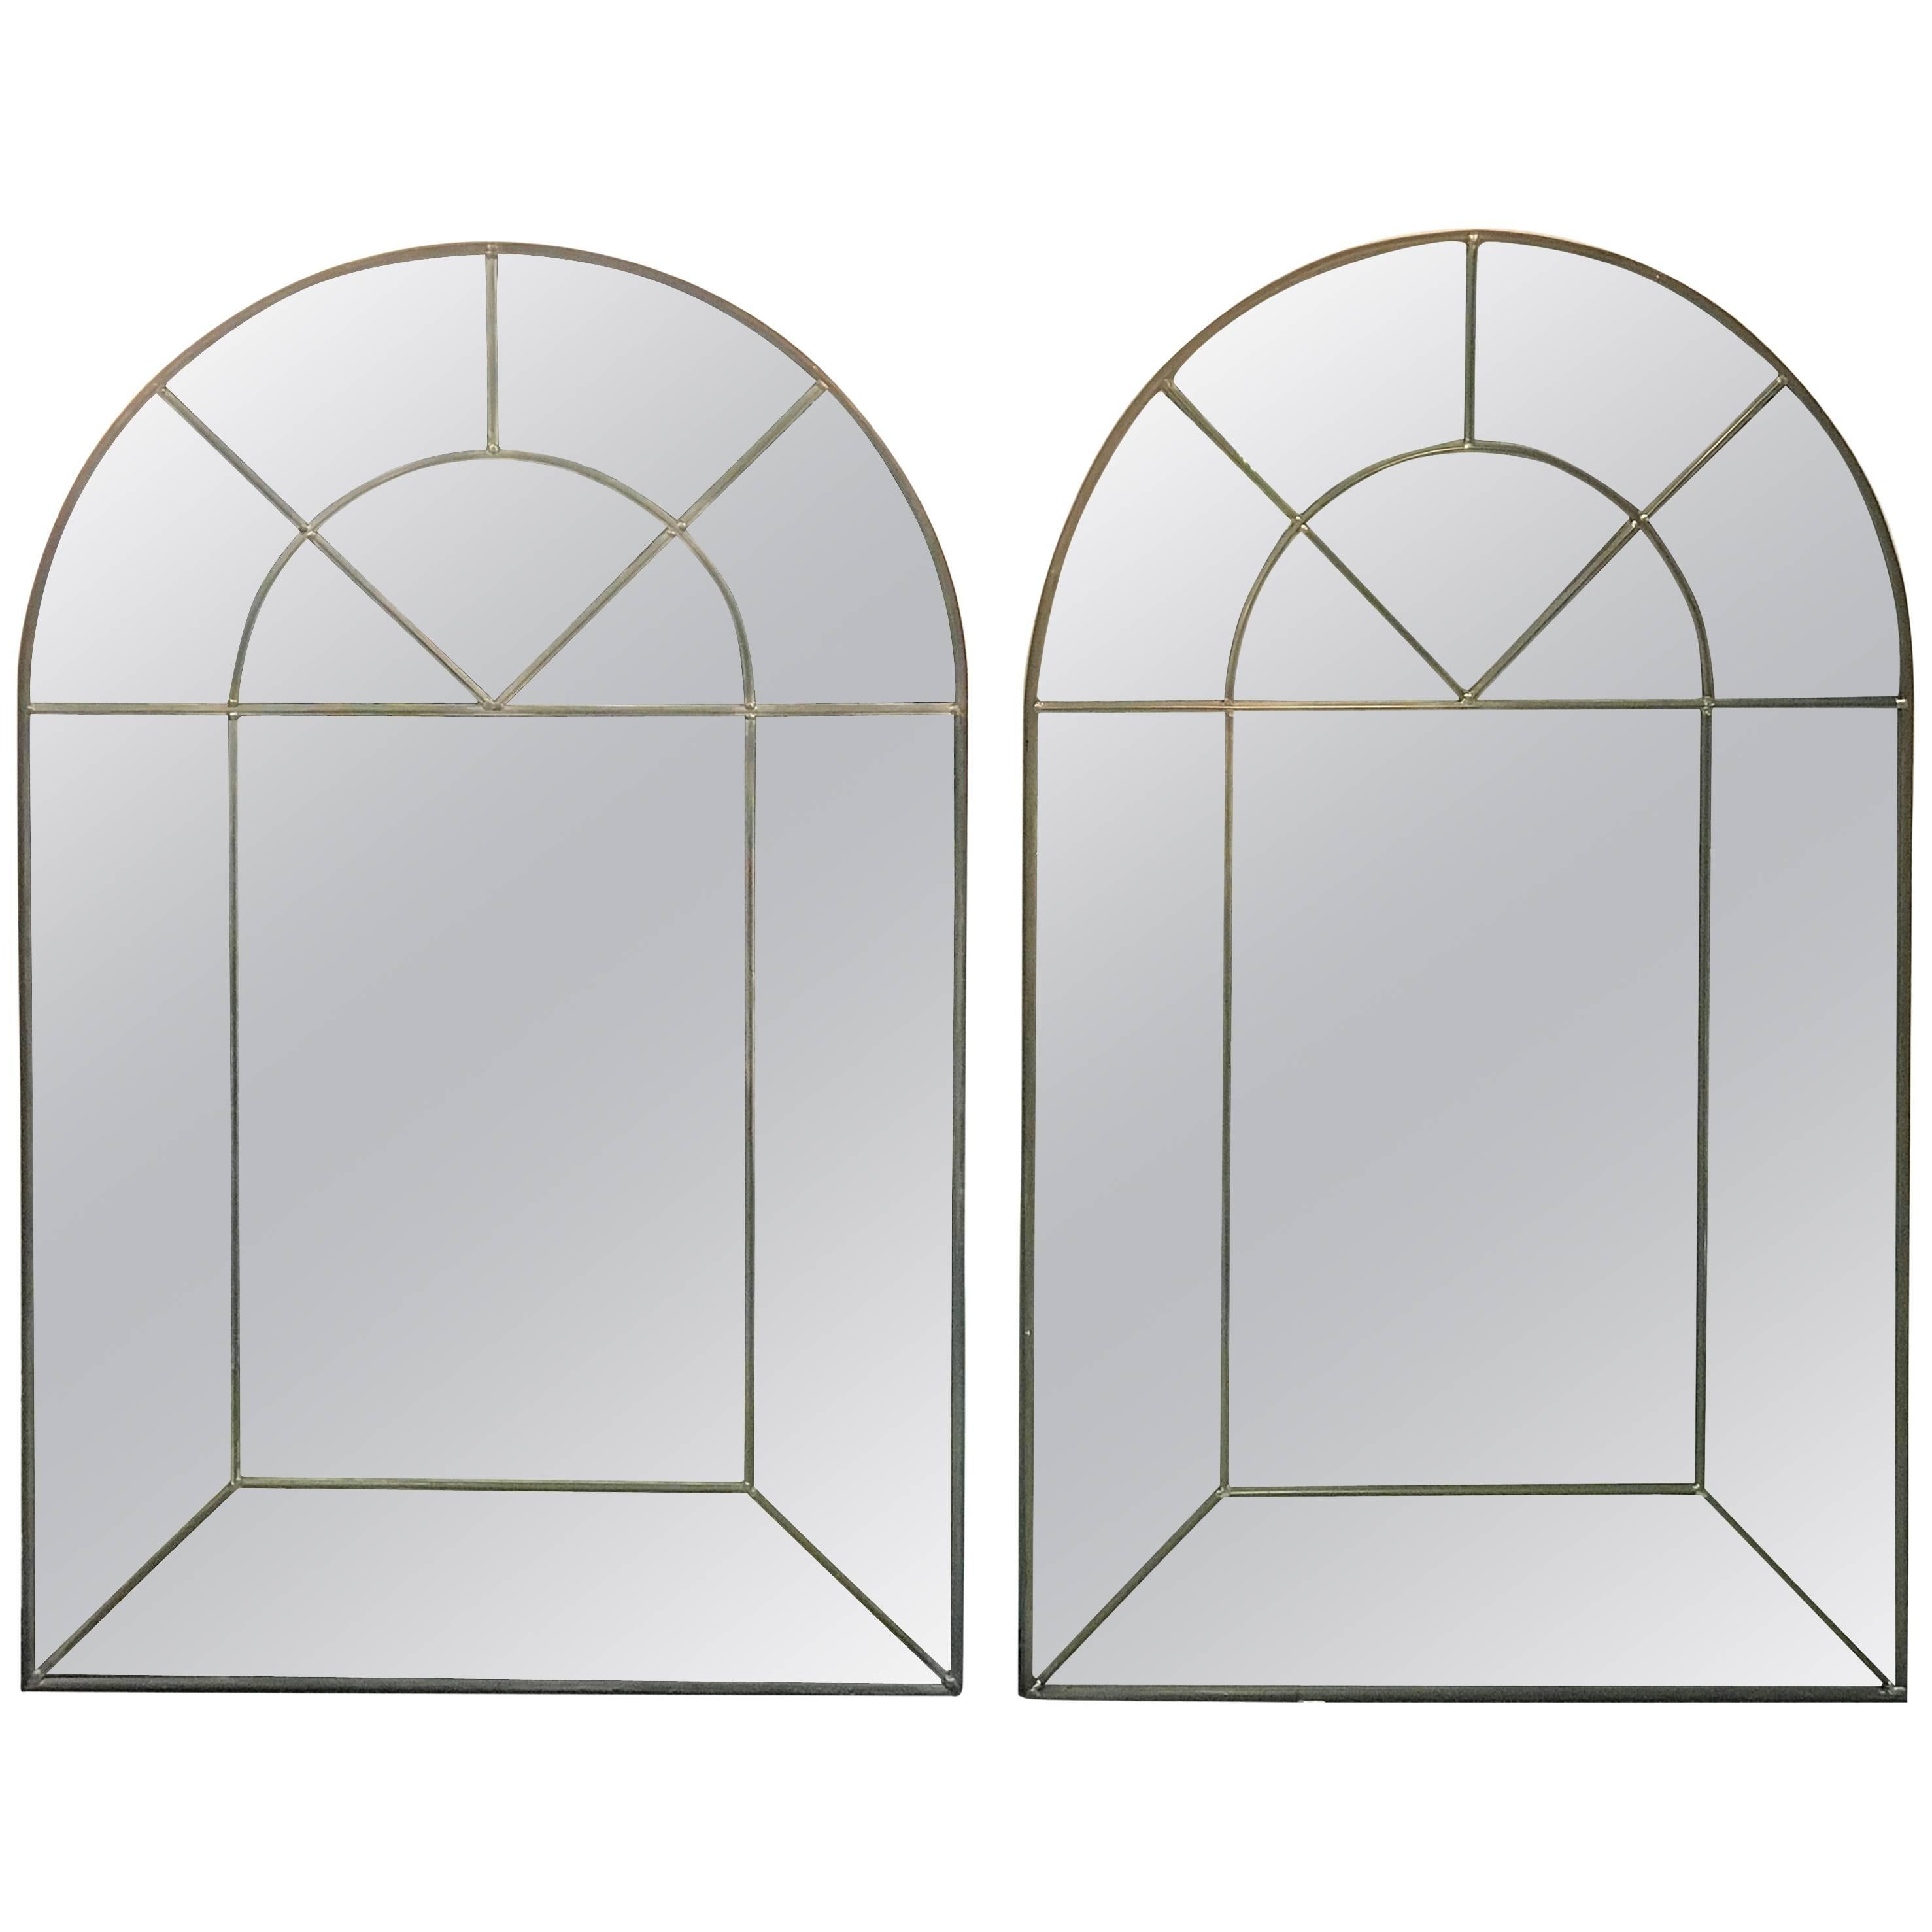 Pair of Arched Mirrors by Carol Canner Signed, 1973 For Sale